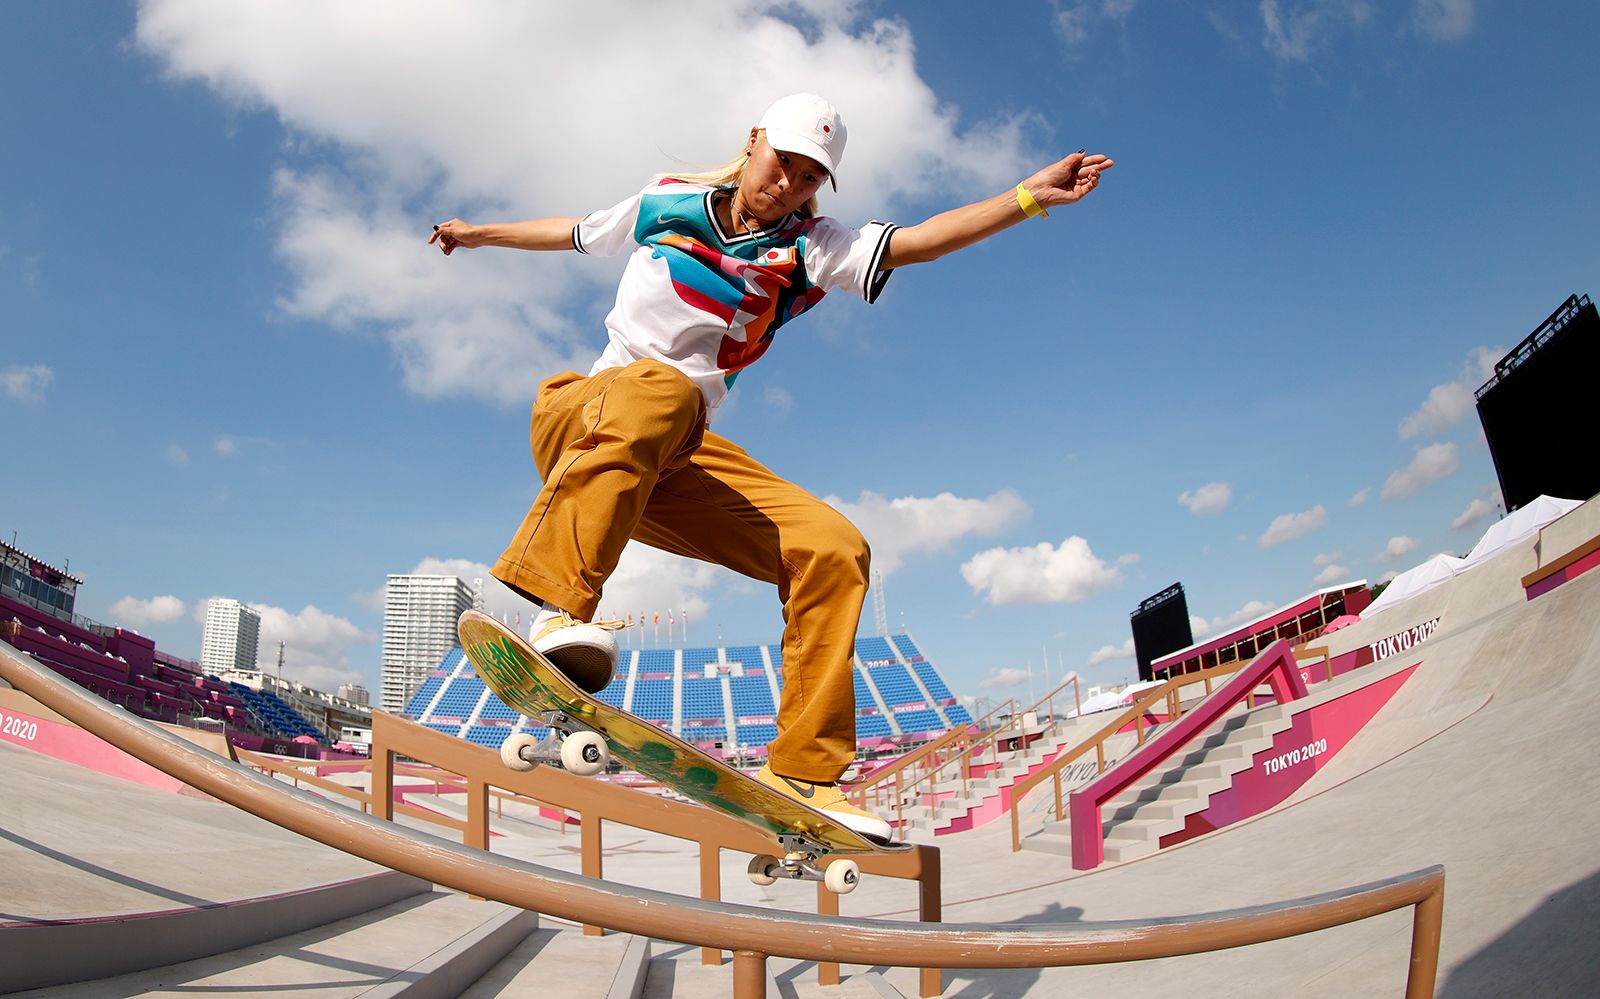 People in Japan thought skate culture was dangerous. Now it's going mainstream | CNN